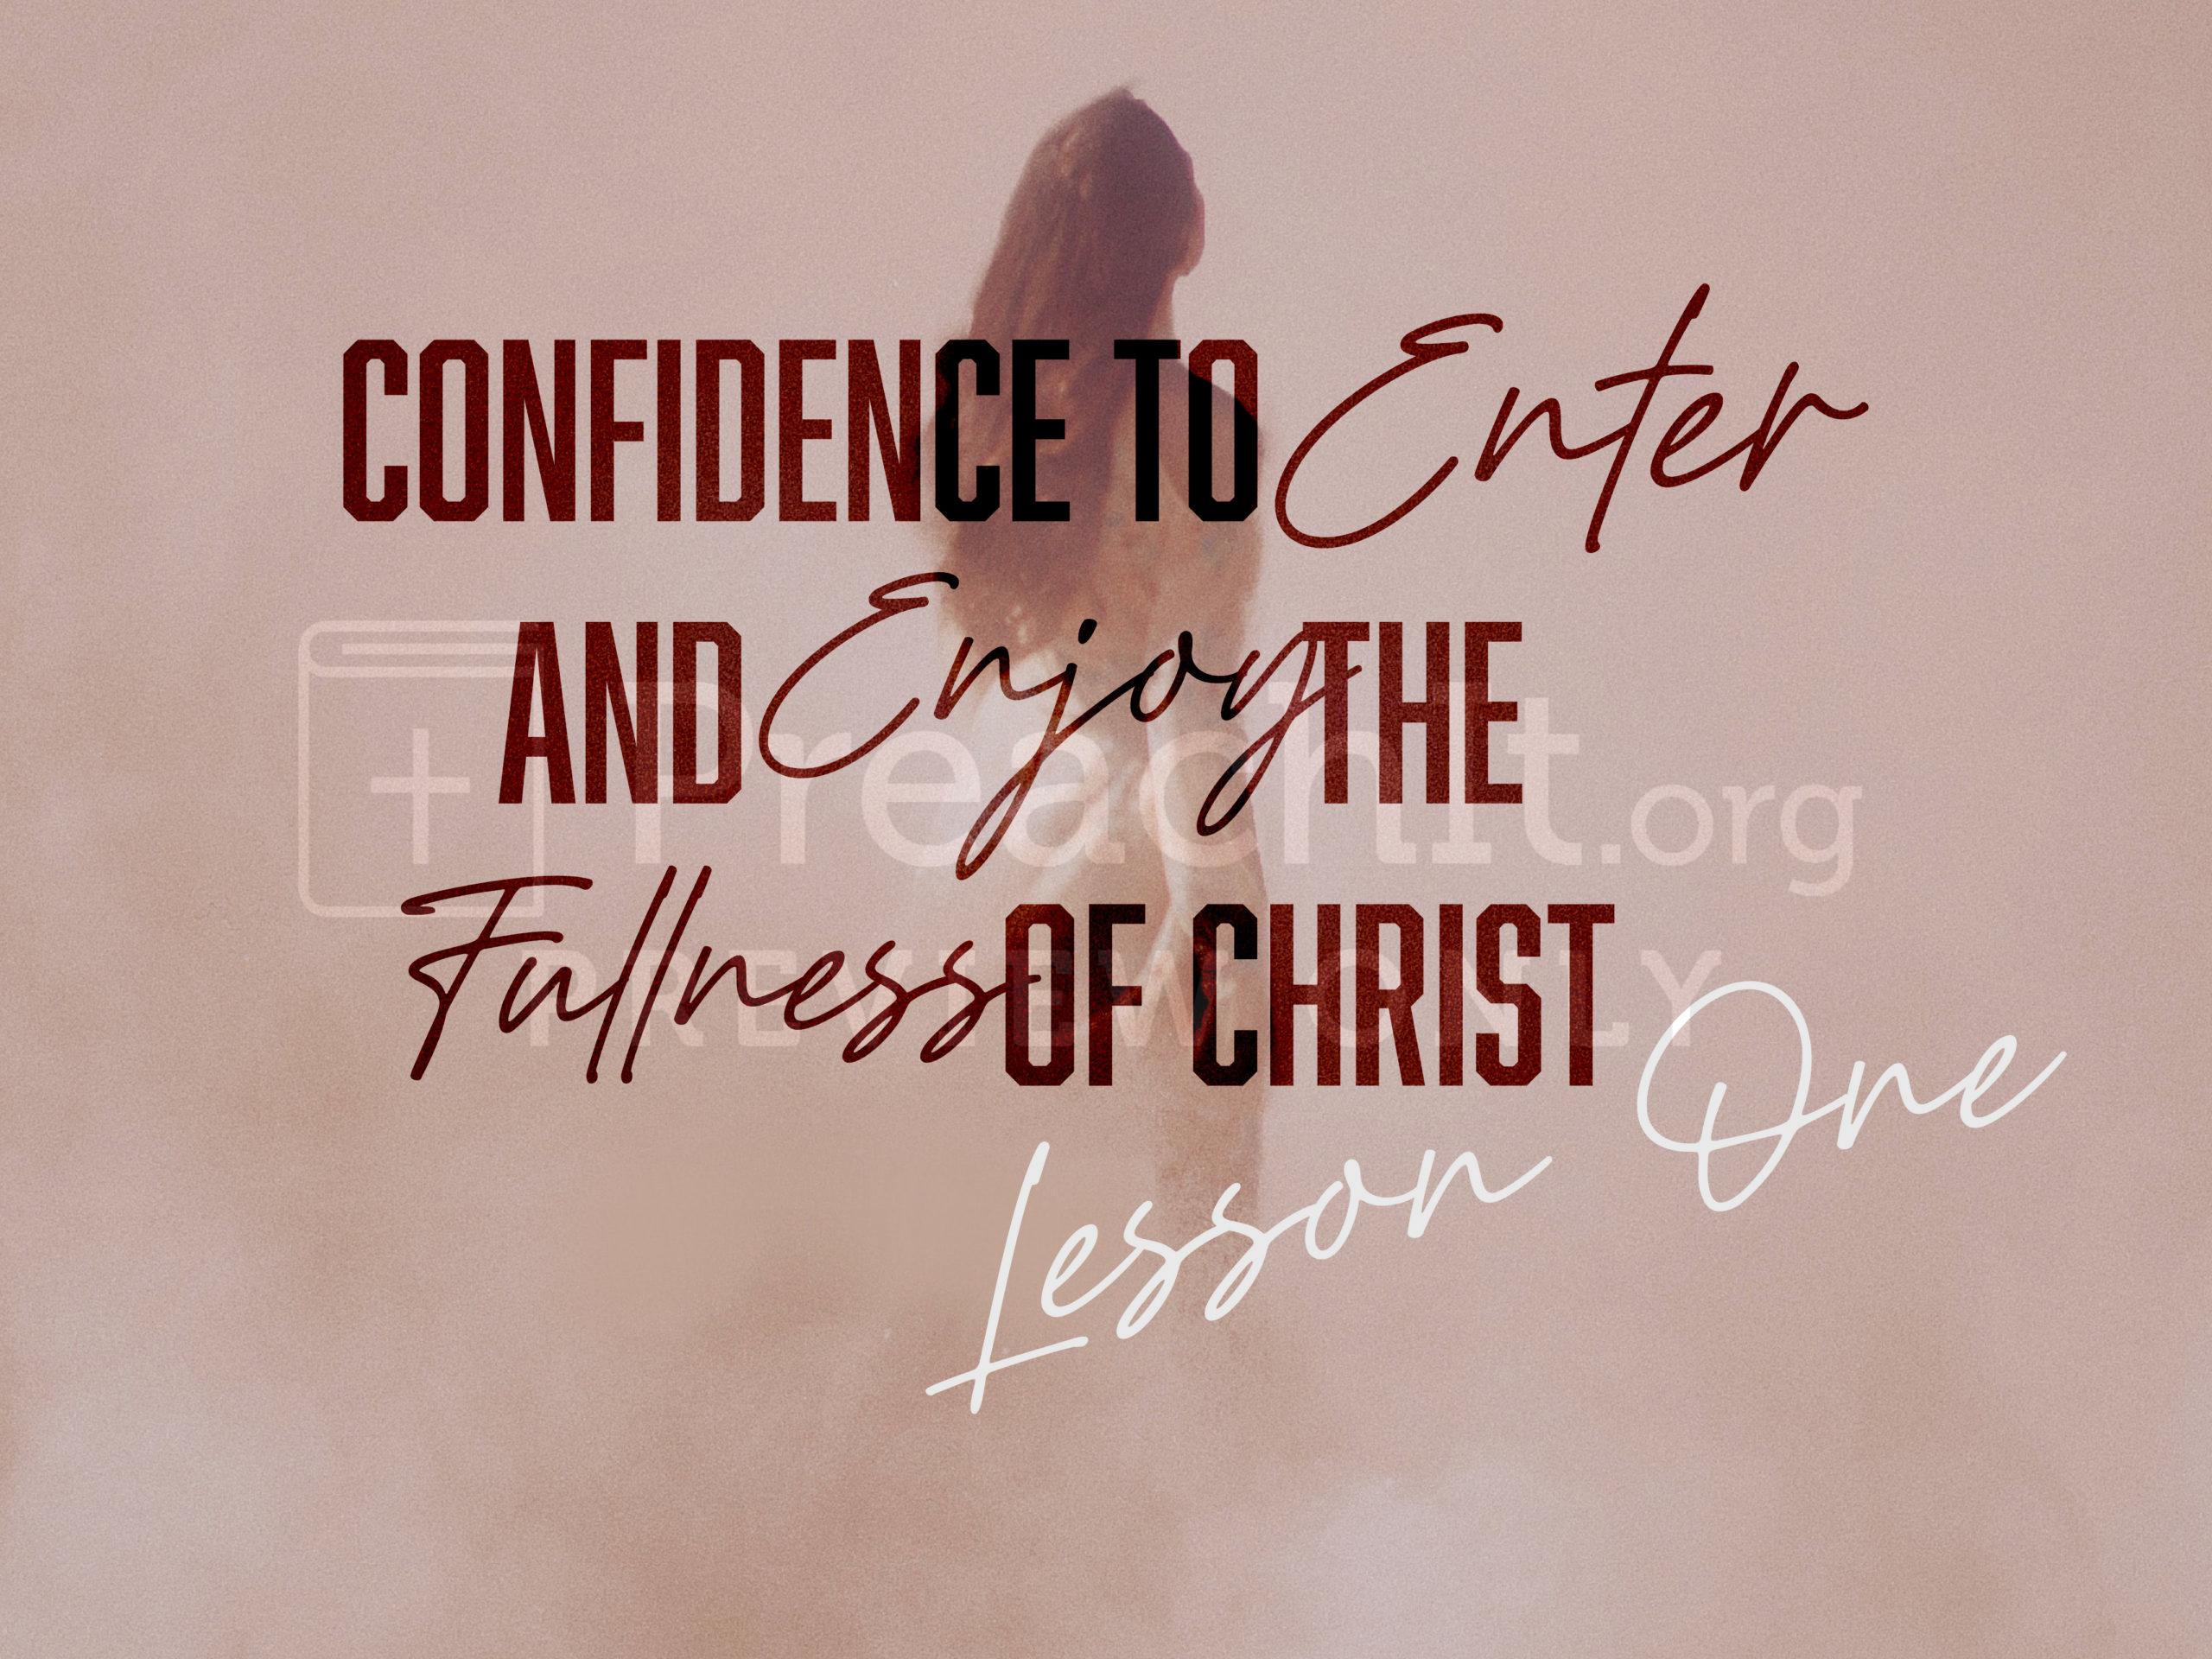 Lesson 1: Confidence to Enter and Enjoy the Fullness of Christ